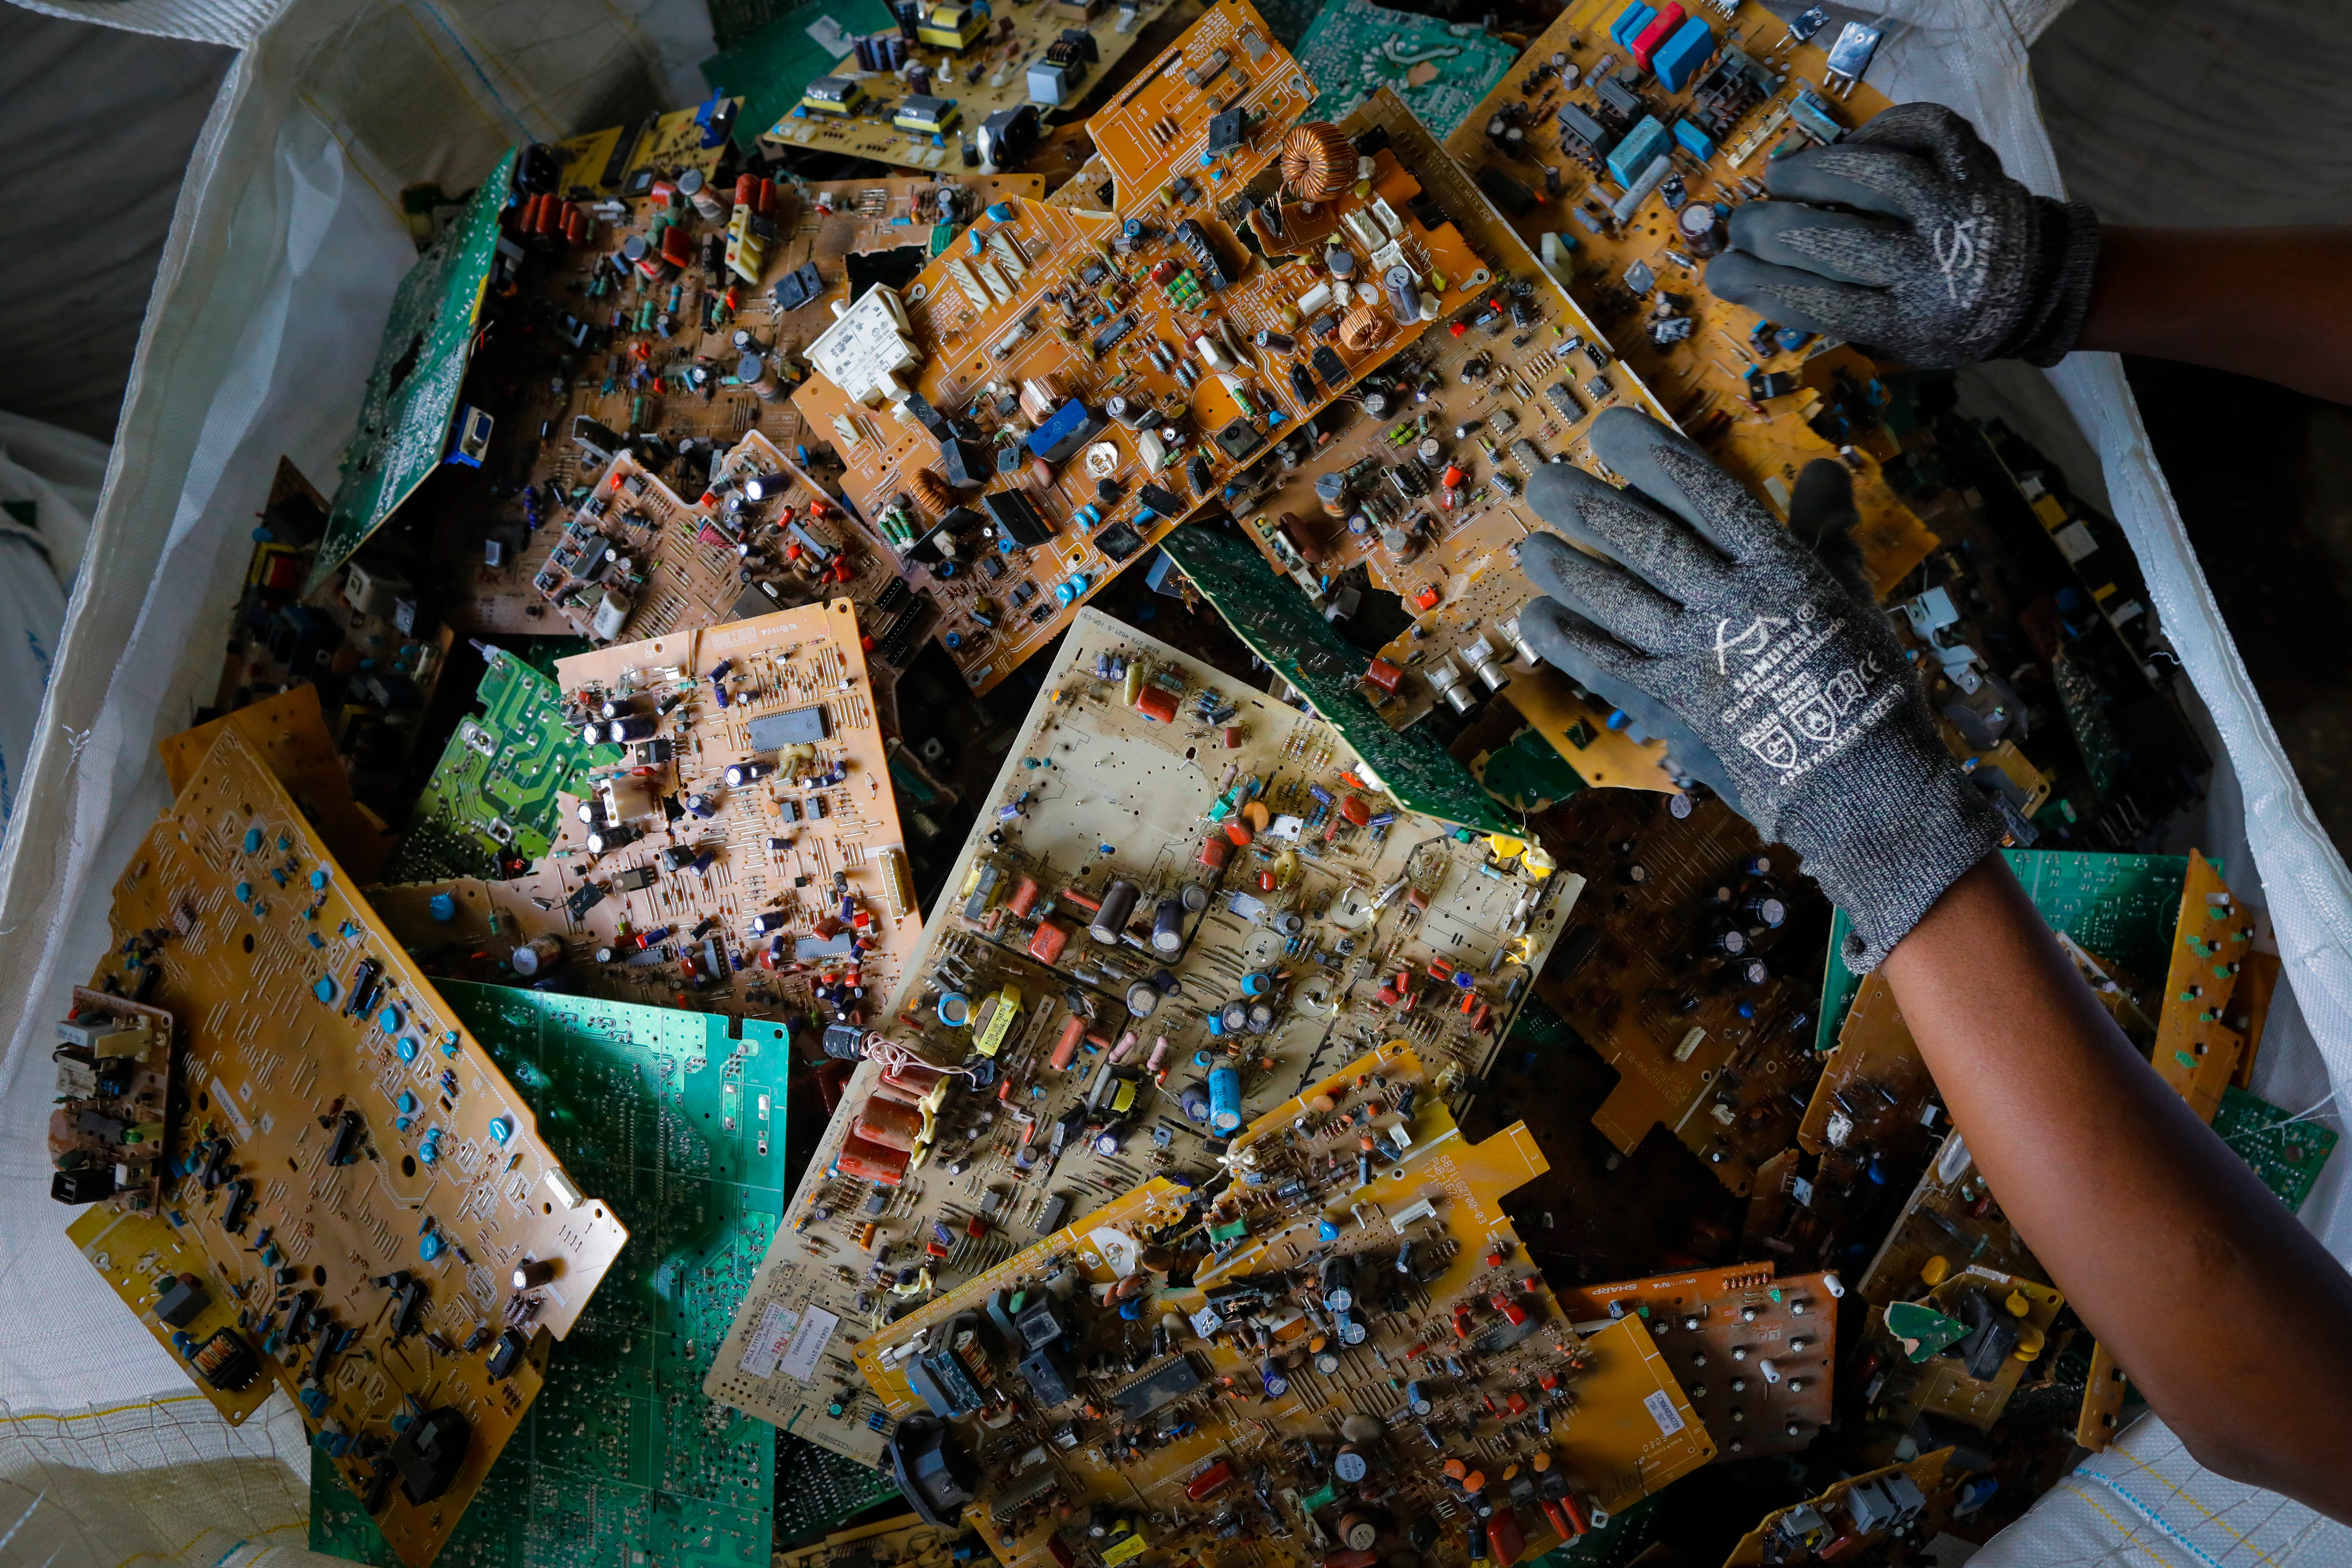 A worker prepares motherboards in Kenya to be shipped to Europe for recycling